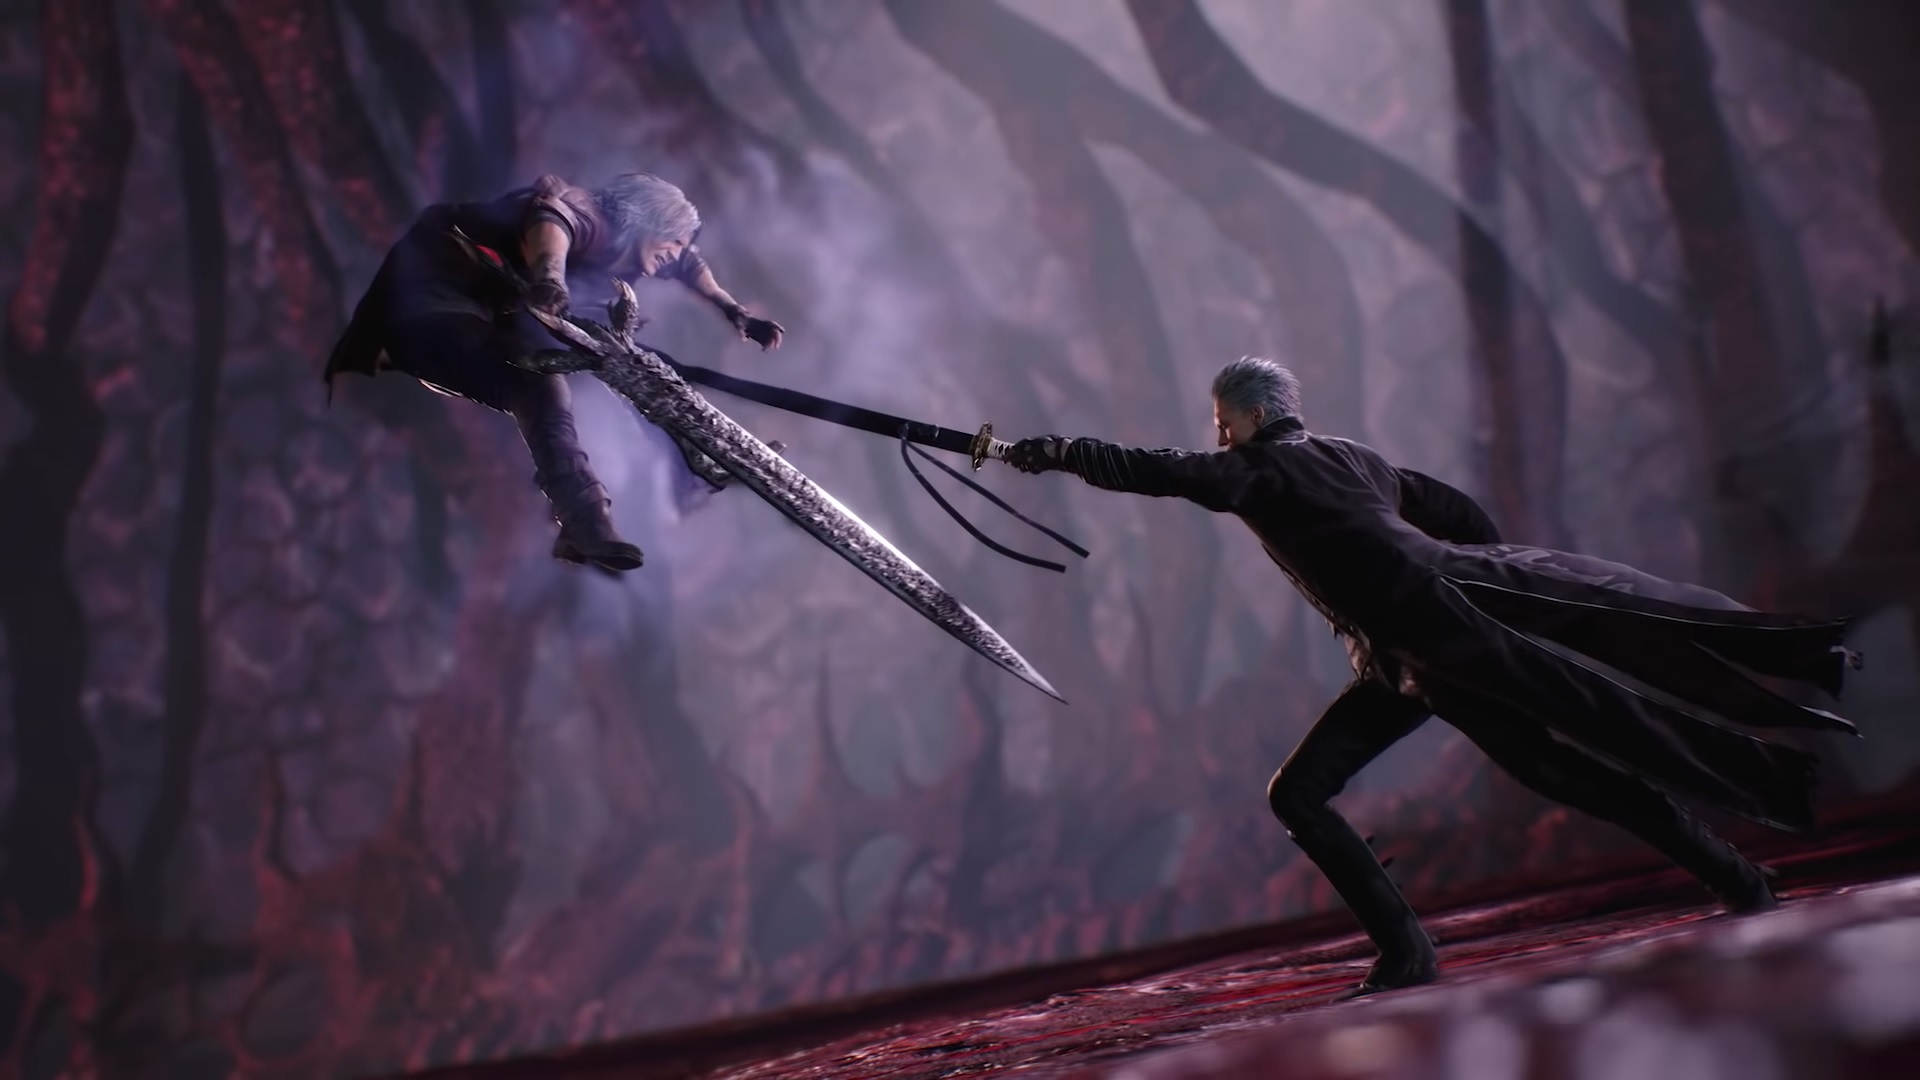 Devil May Cry 4 Special Edition -- Launch Trailer